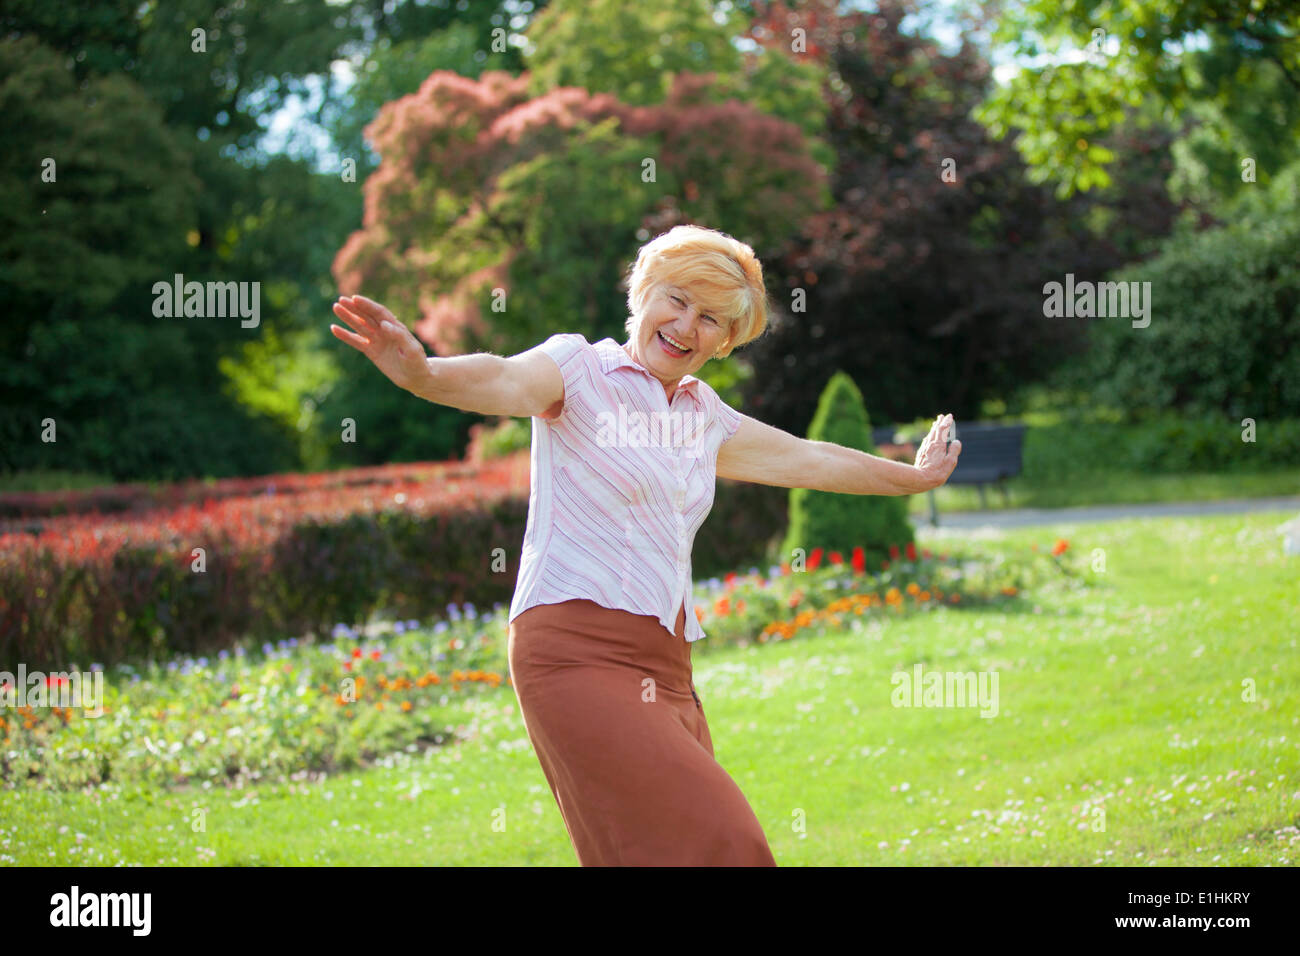 Gaiety. Delighted Playful Mature Woman with Outstretched Arms Laughing Outside Stock Photo